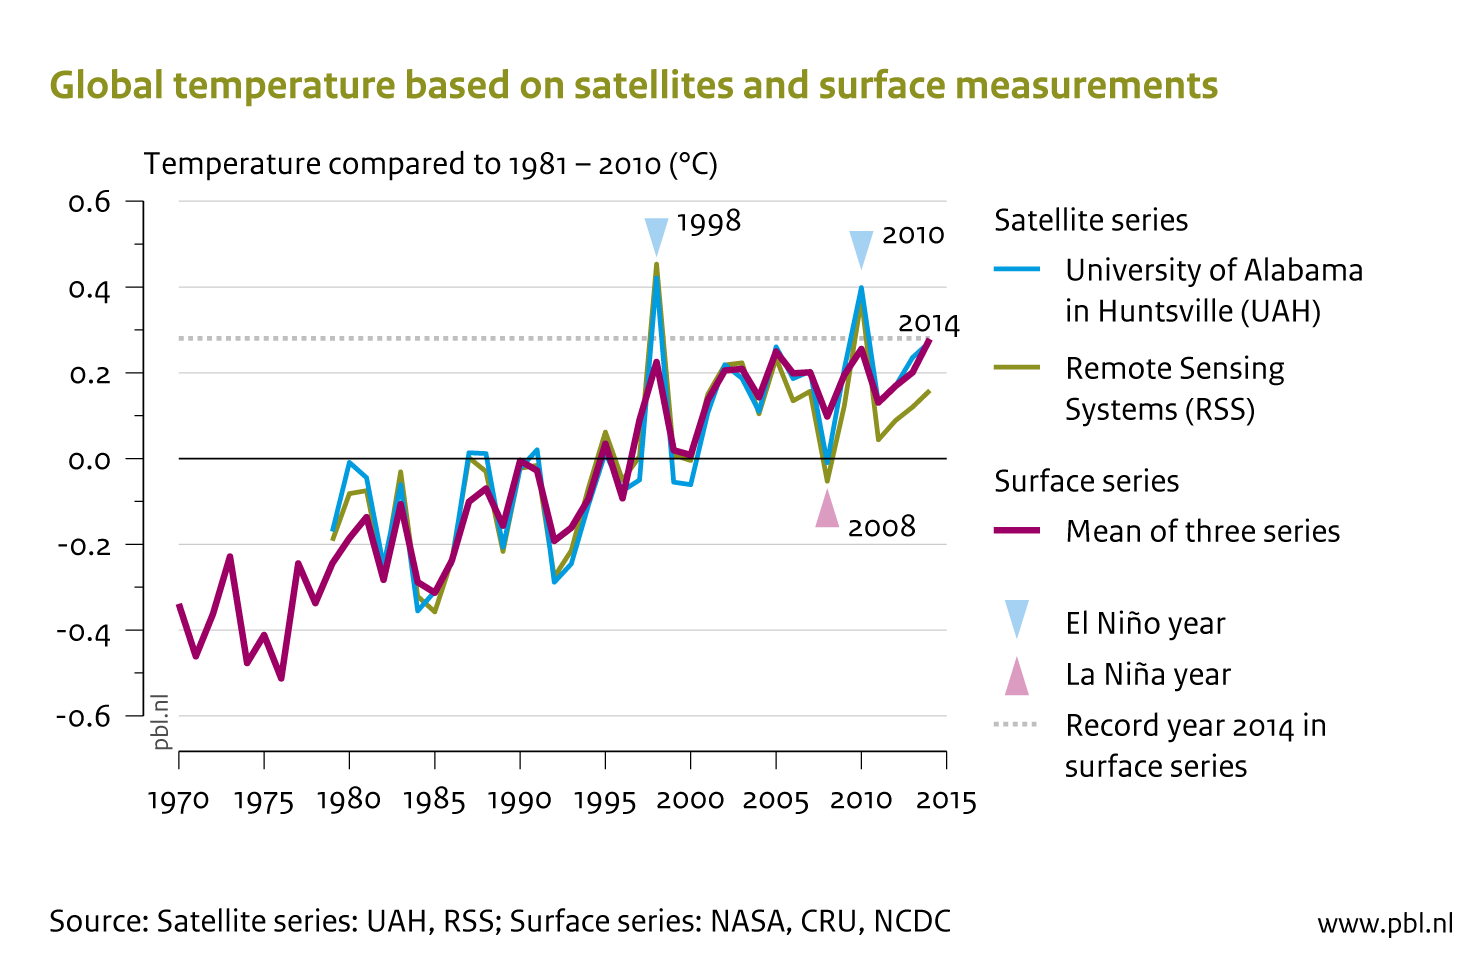 Temperatures according to 2 satellite series (UAH and RSS). The purple line indicates the mean of the three surface temperature series. The satellite series show peaks in 1998 and 2010, as a result of an El Niño, which are greater than those in the surface temperature series. The low satellite value for 2008 coincides with the opposite of an El Niño: La Niña. Note how the last 4 years in the RSS series are far below those in the other series. According to the surface temperature measurement, 2014 was the warmest year on record!